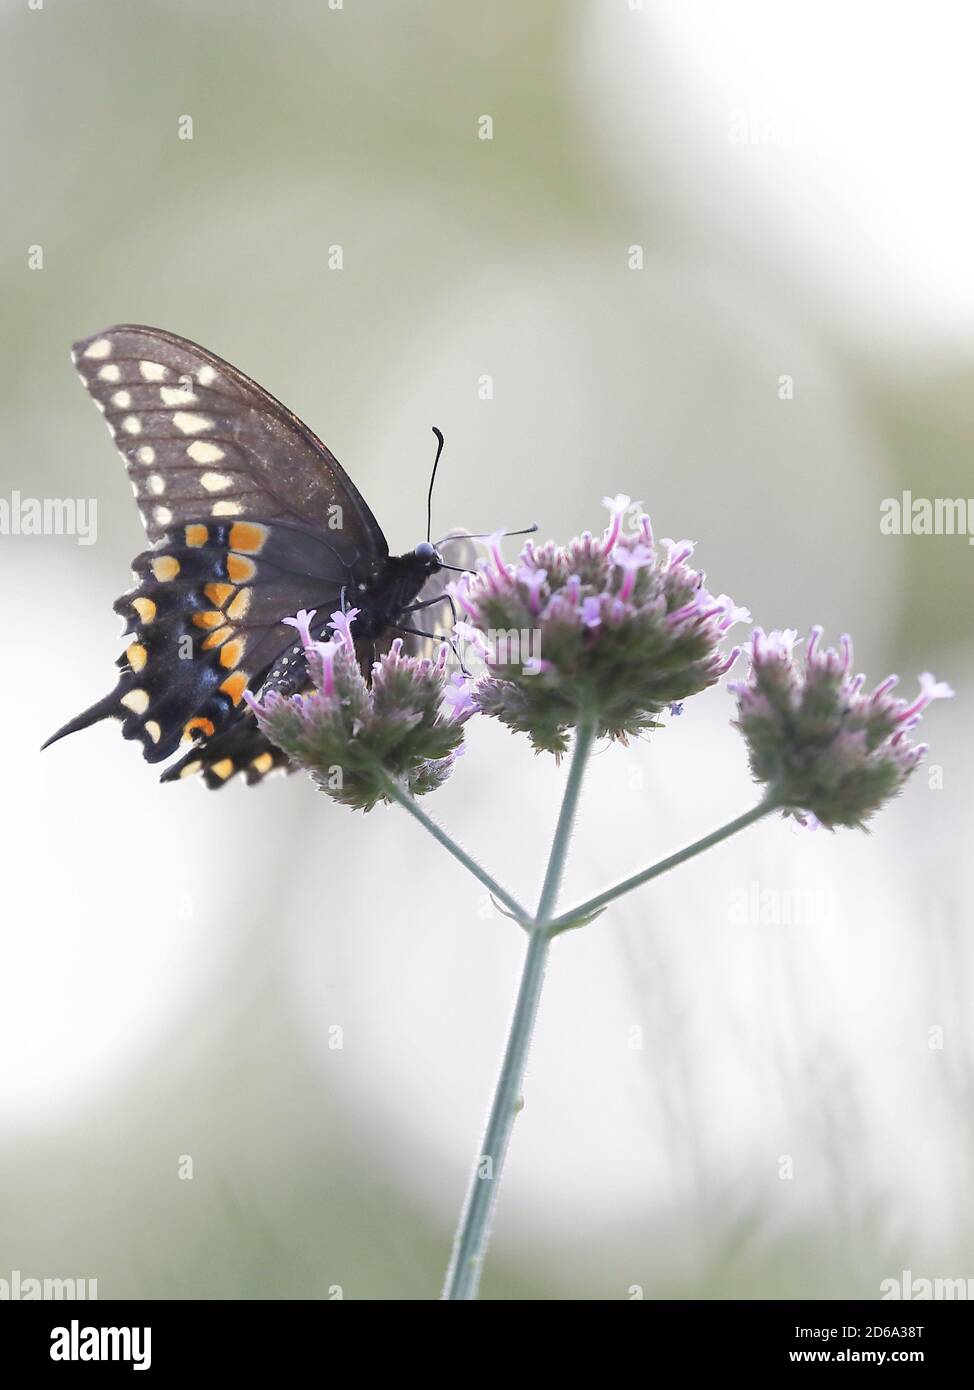 Eastern black swallowtail butterfly (Papilio polyxenes asterius) sucking nectar on a purple flower of New York, North America Stock Photo